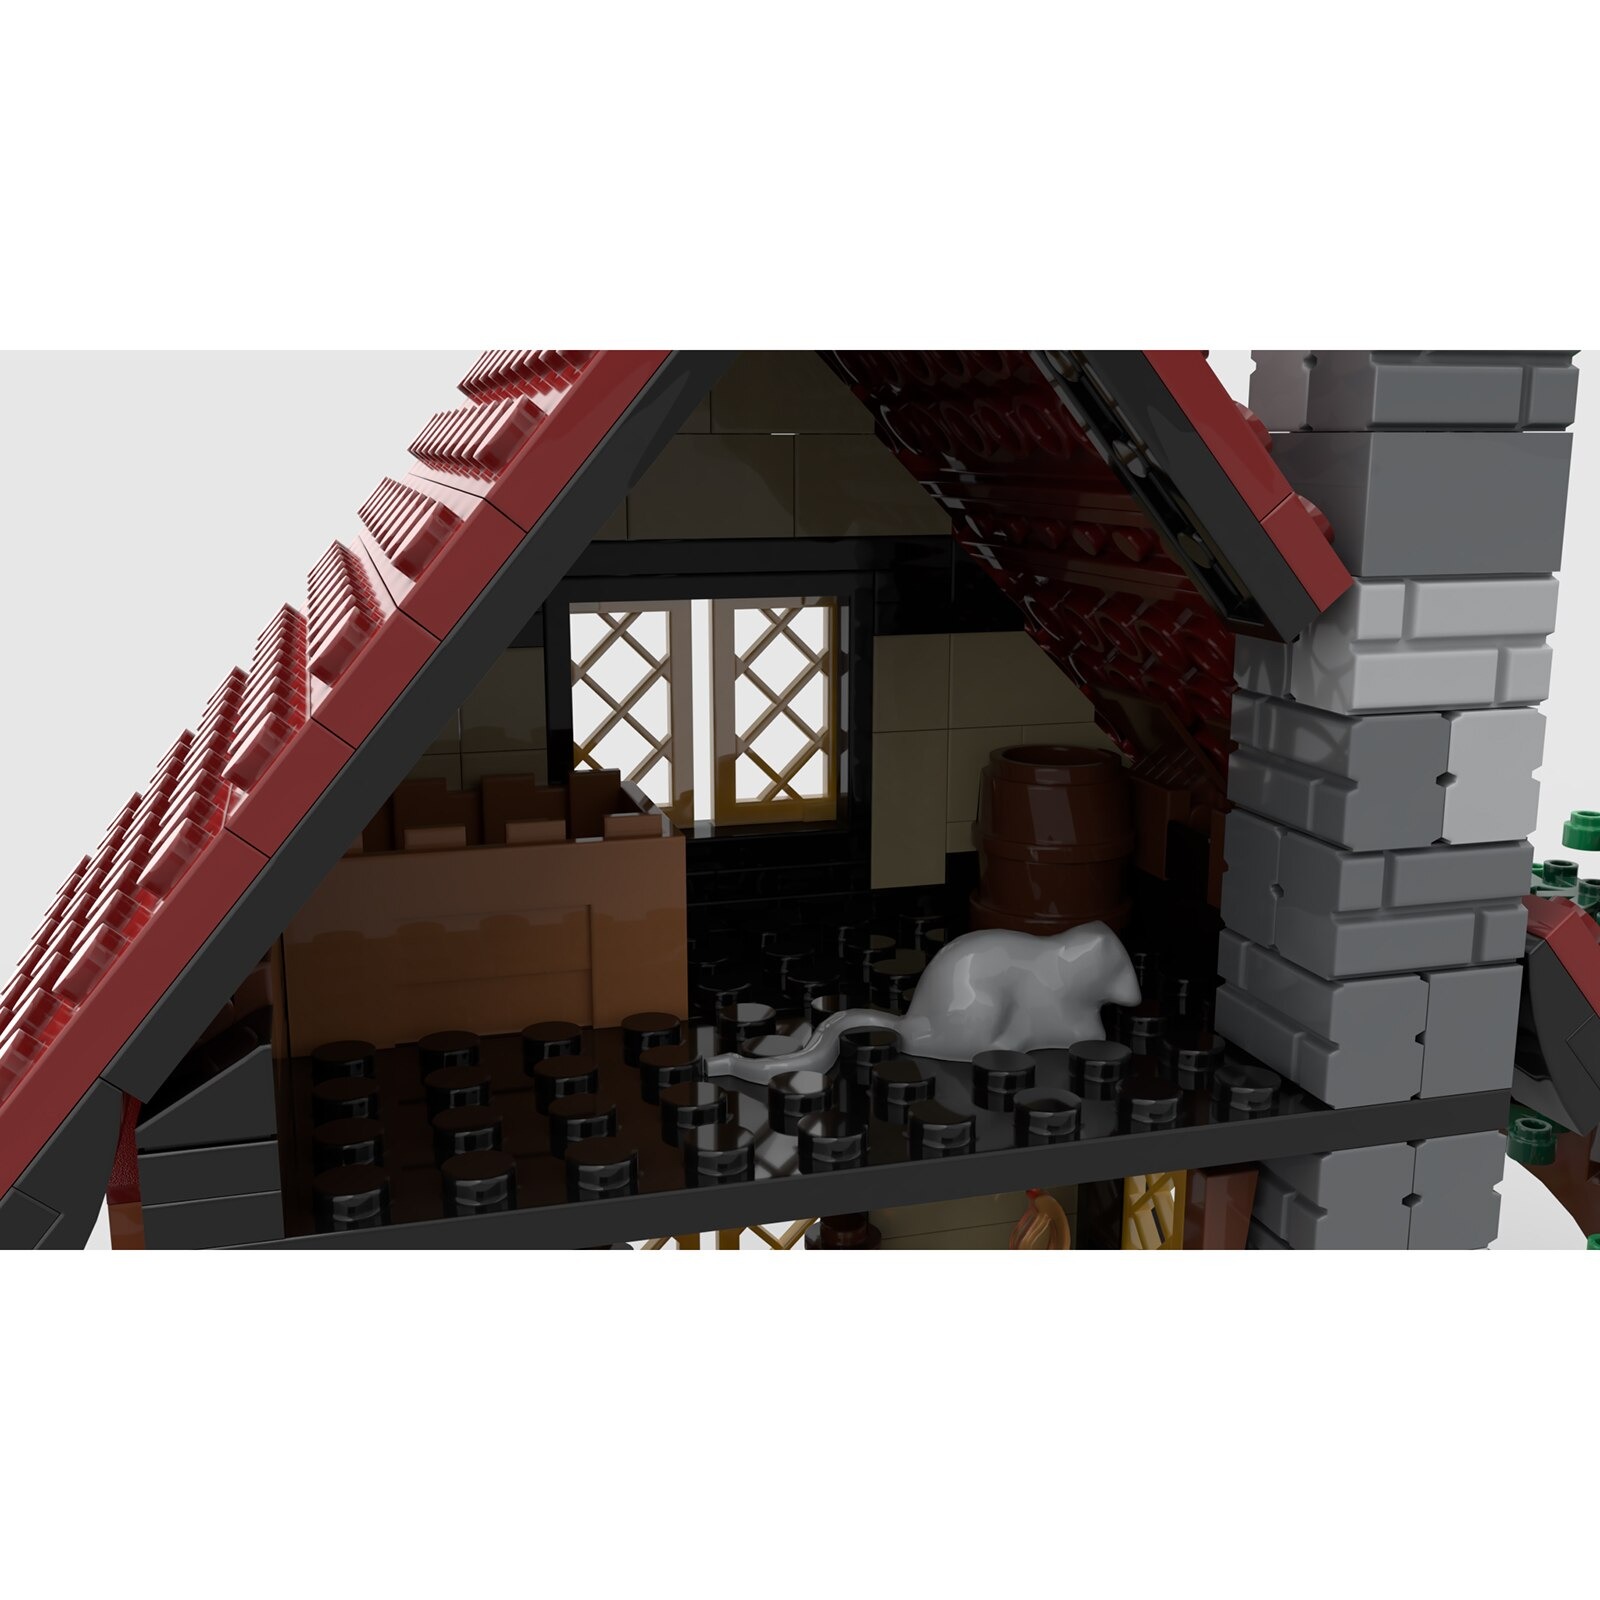 authorized moc 82740 medieval house 524 p main 3 - MOULD KING